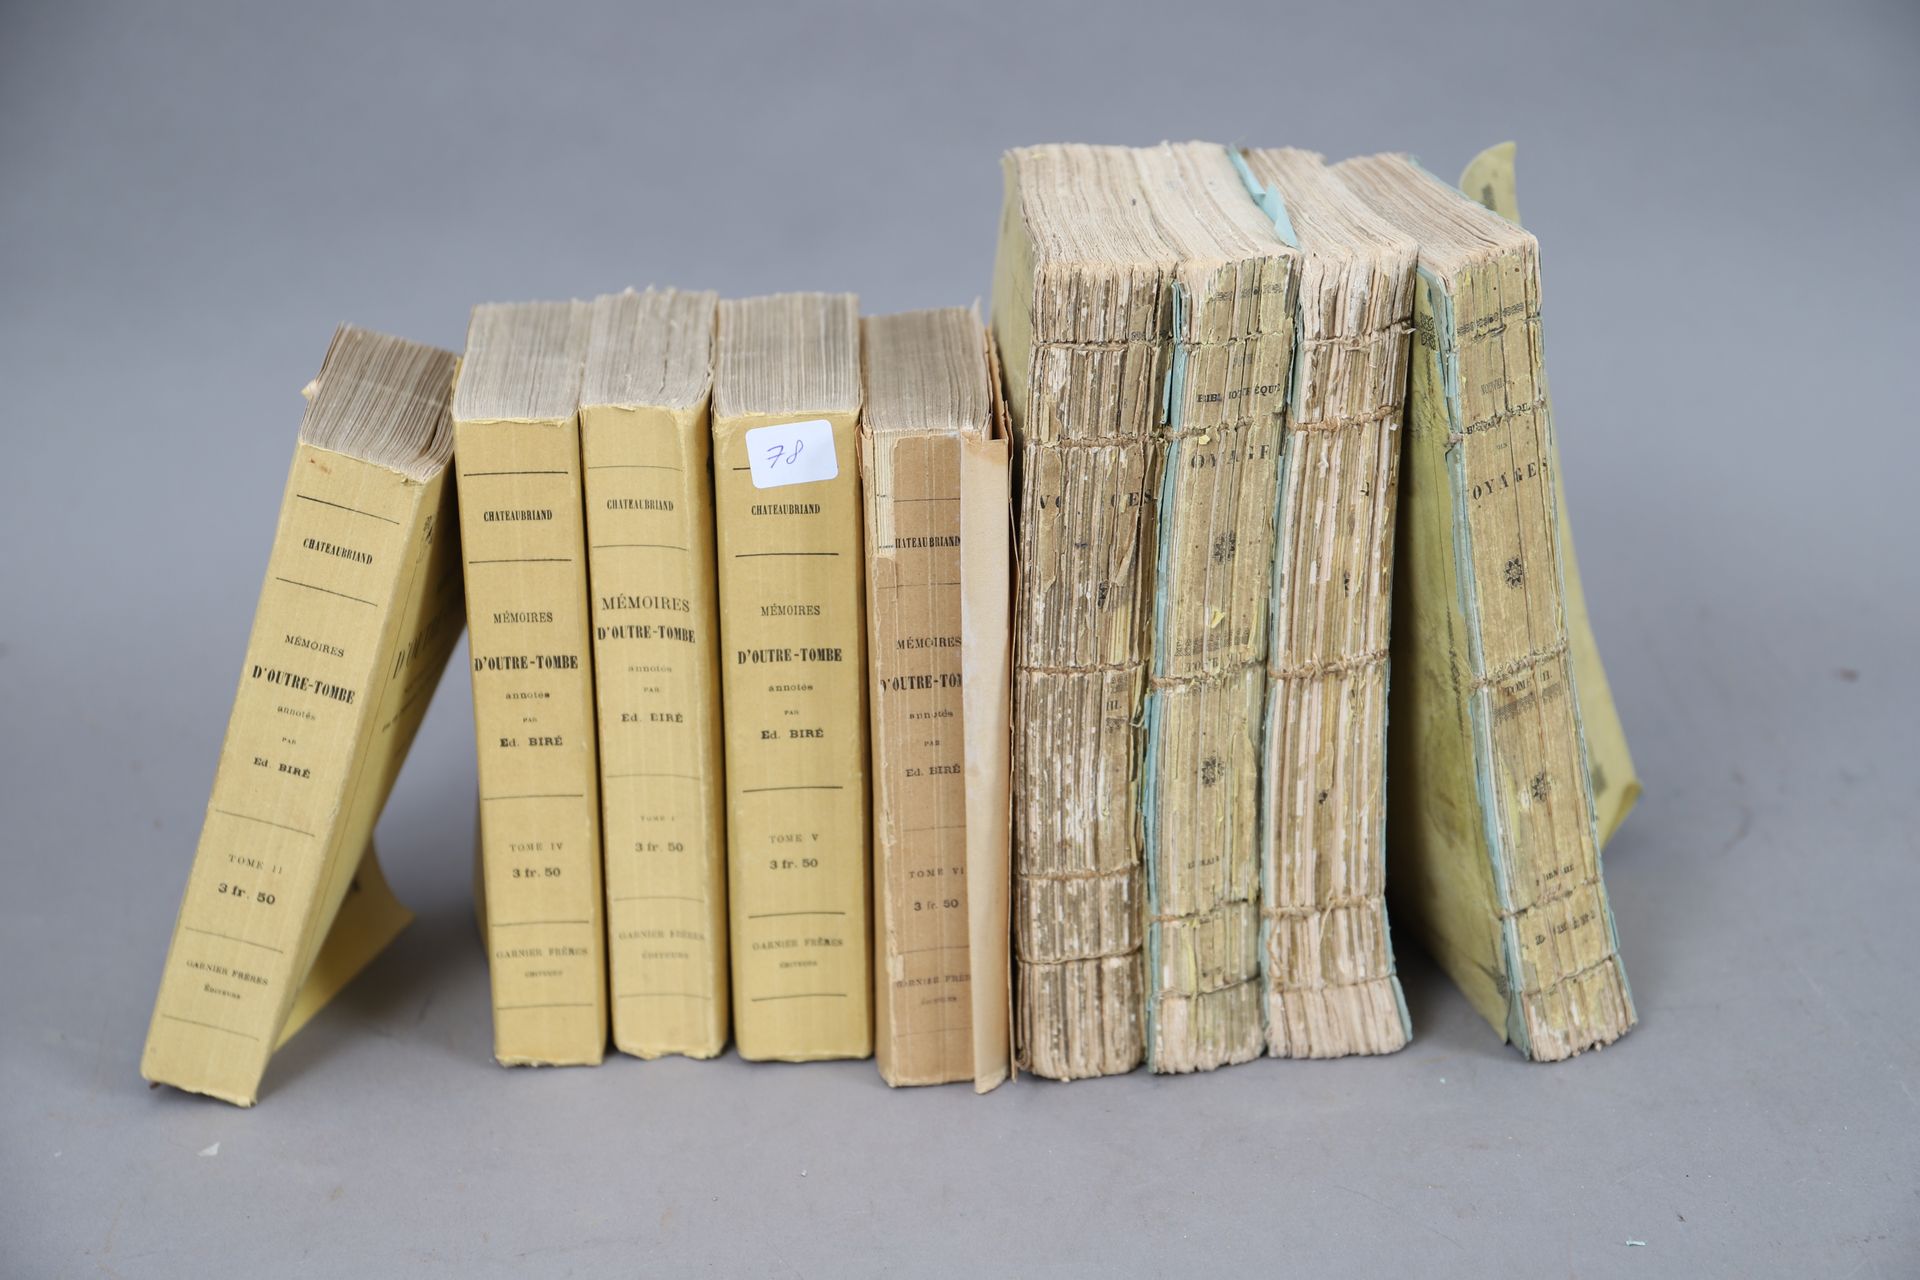 Null CHATEAUBRIAND - MEMOIRES d'OUTRE TOMBE

9 bound volumes.